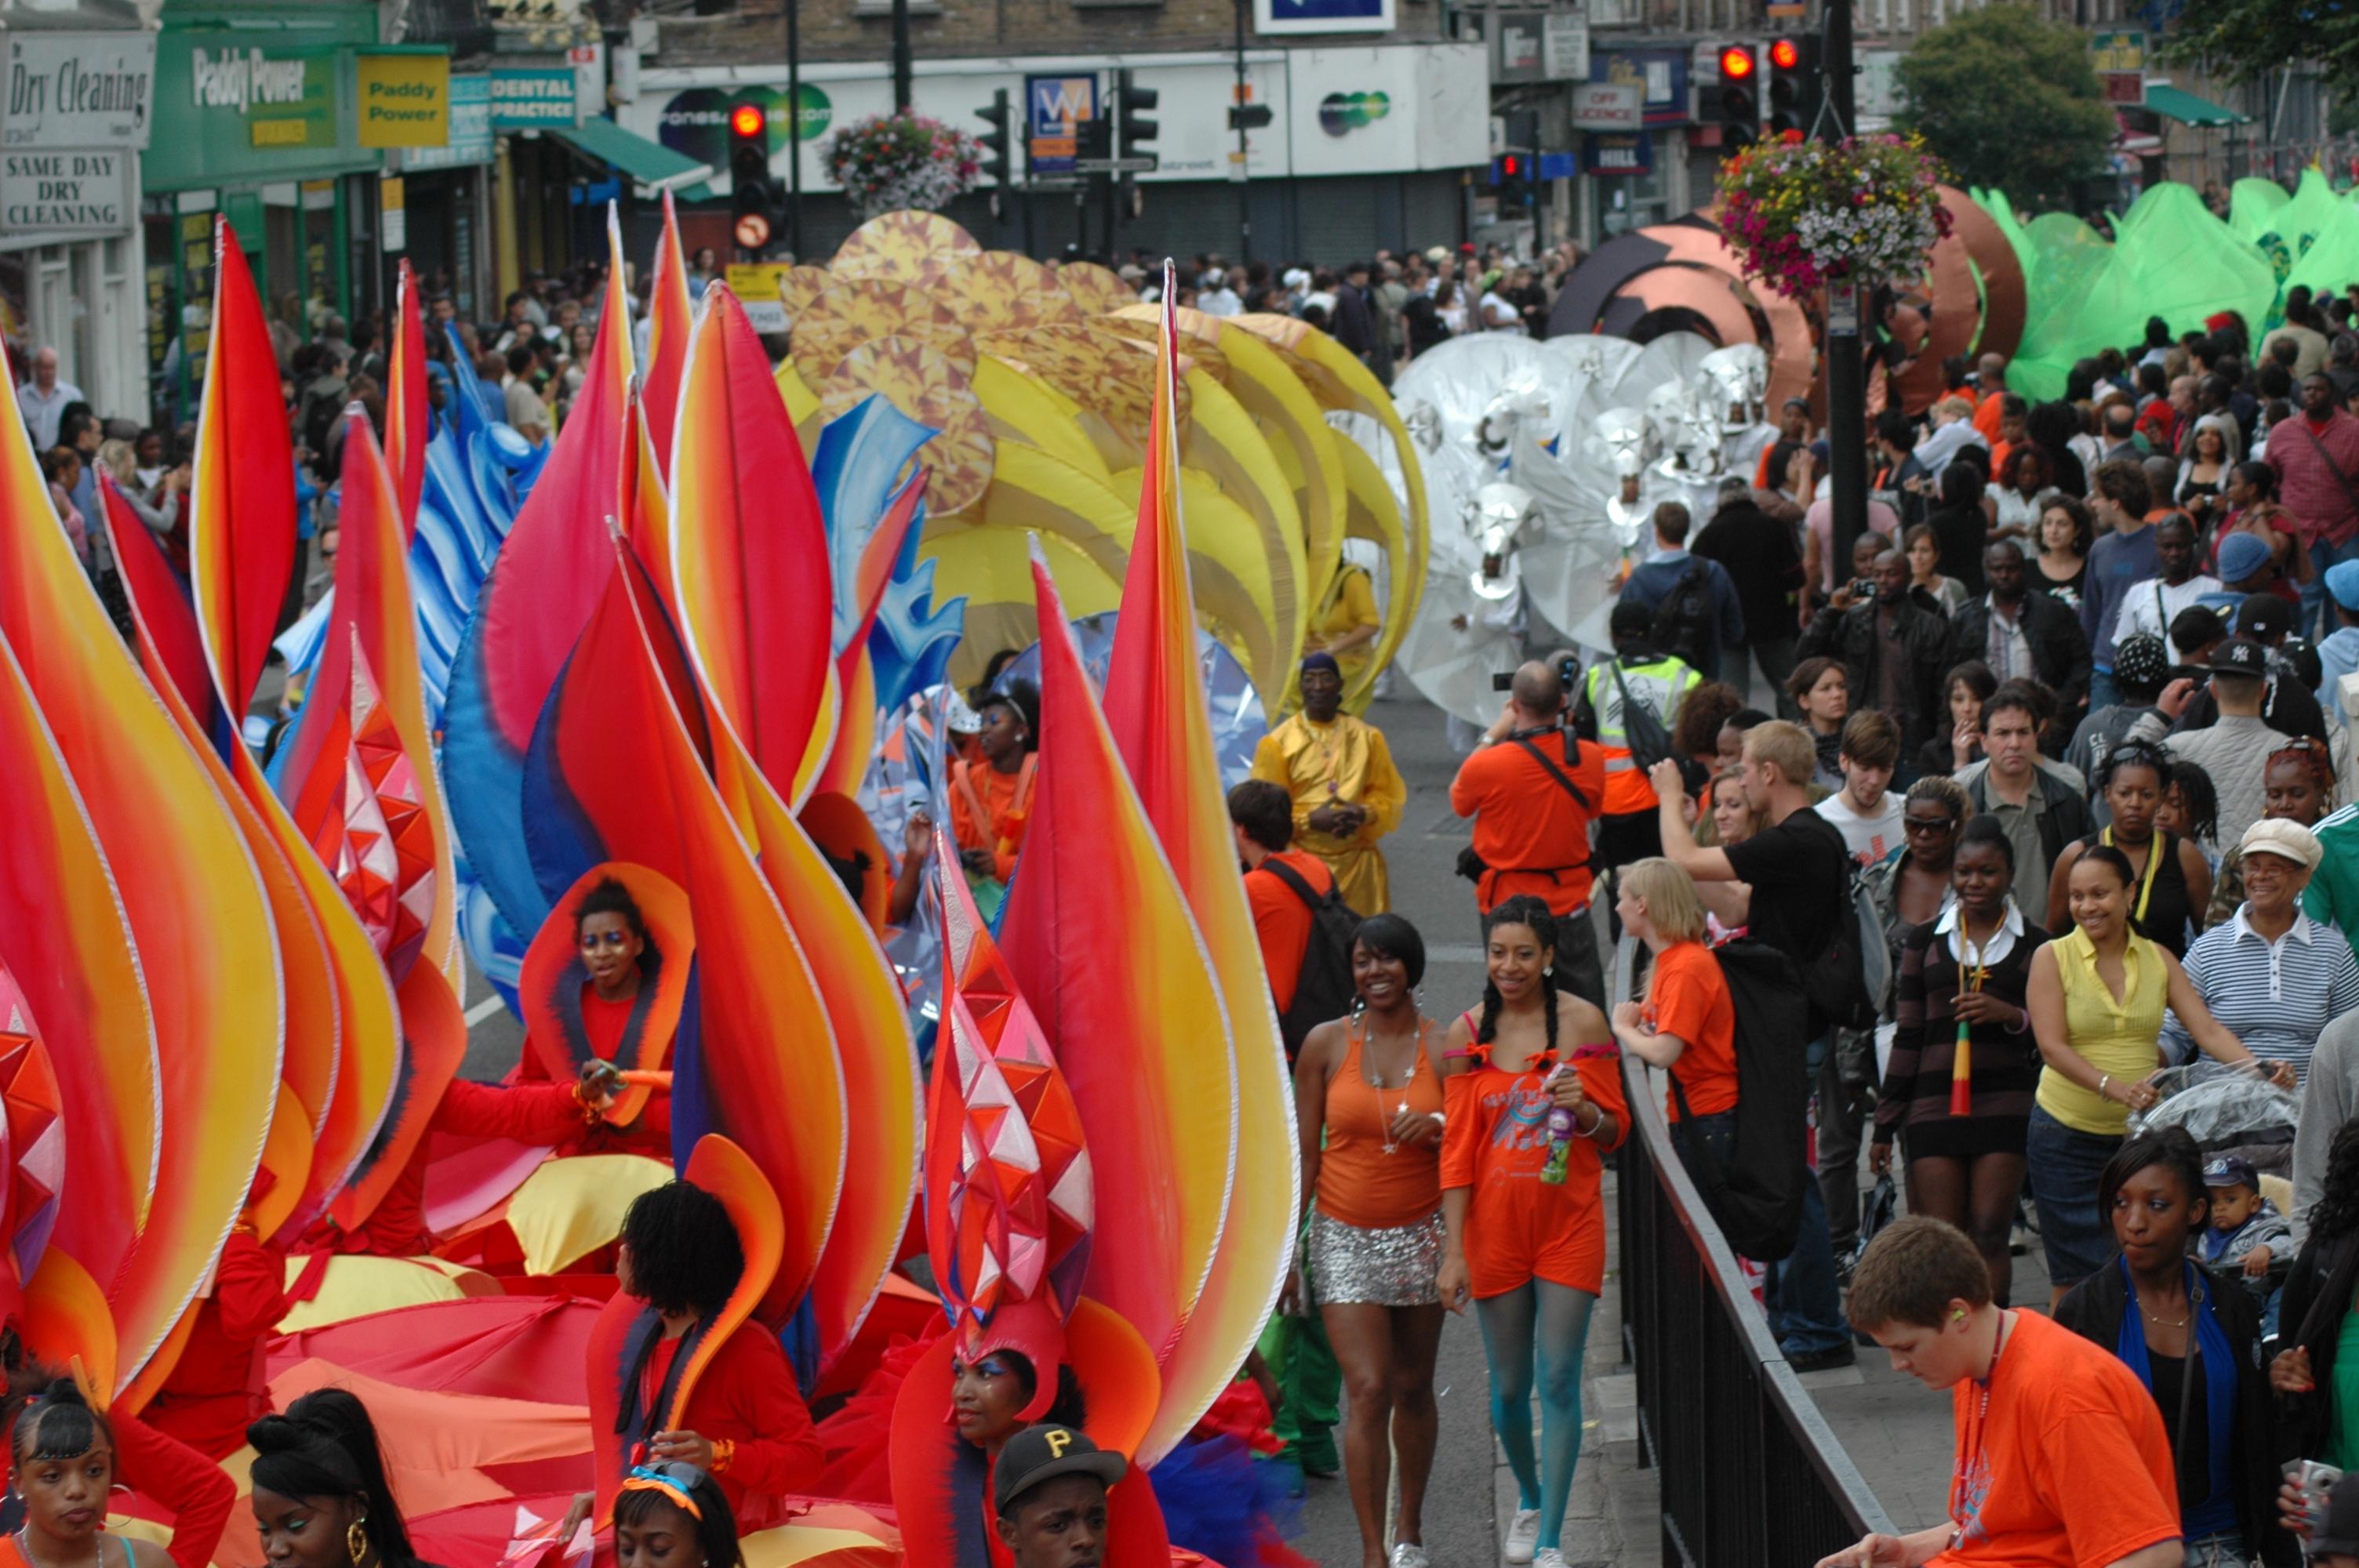 Colour photograph of a street carnival with elaborate red and orange costumes in the foreground. Spectators can be seen smiling and walking alongside the parade, behind a barrier, on the right-hand side.